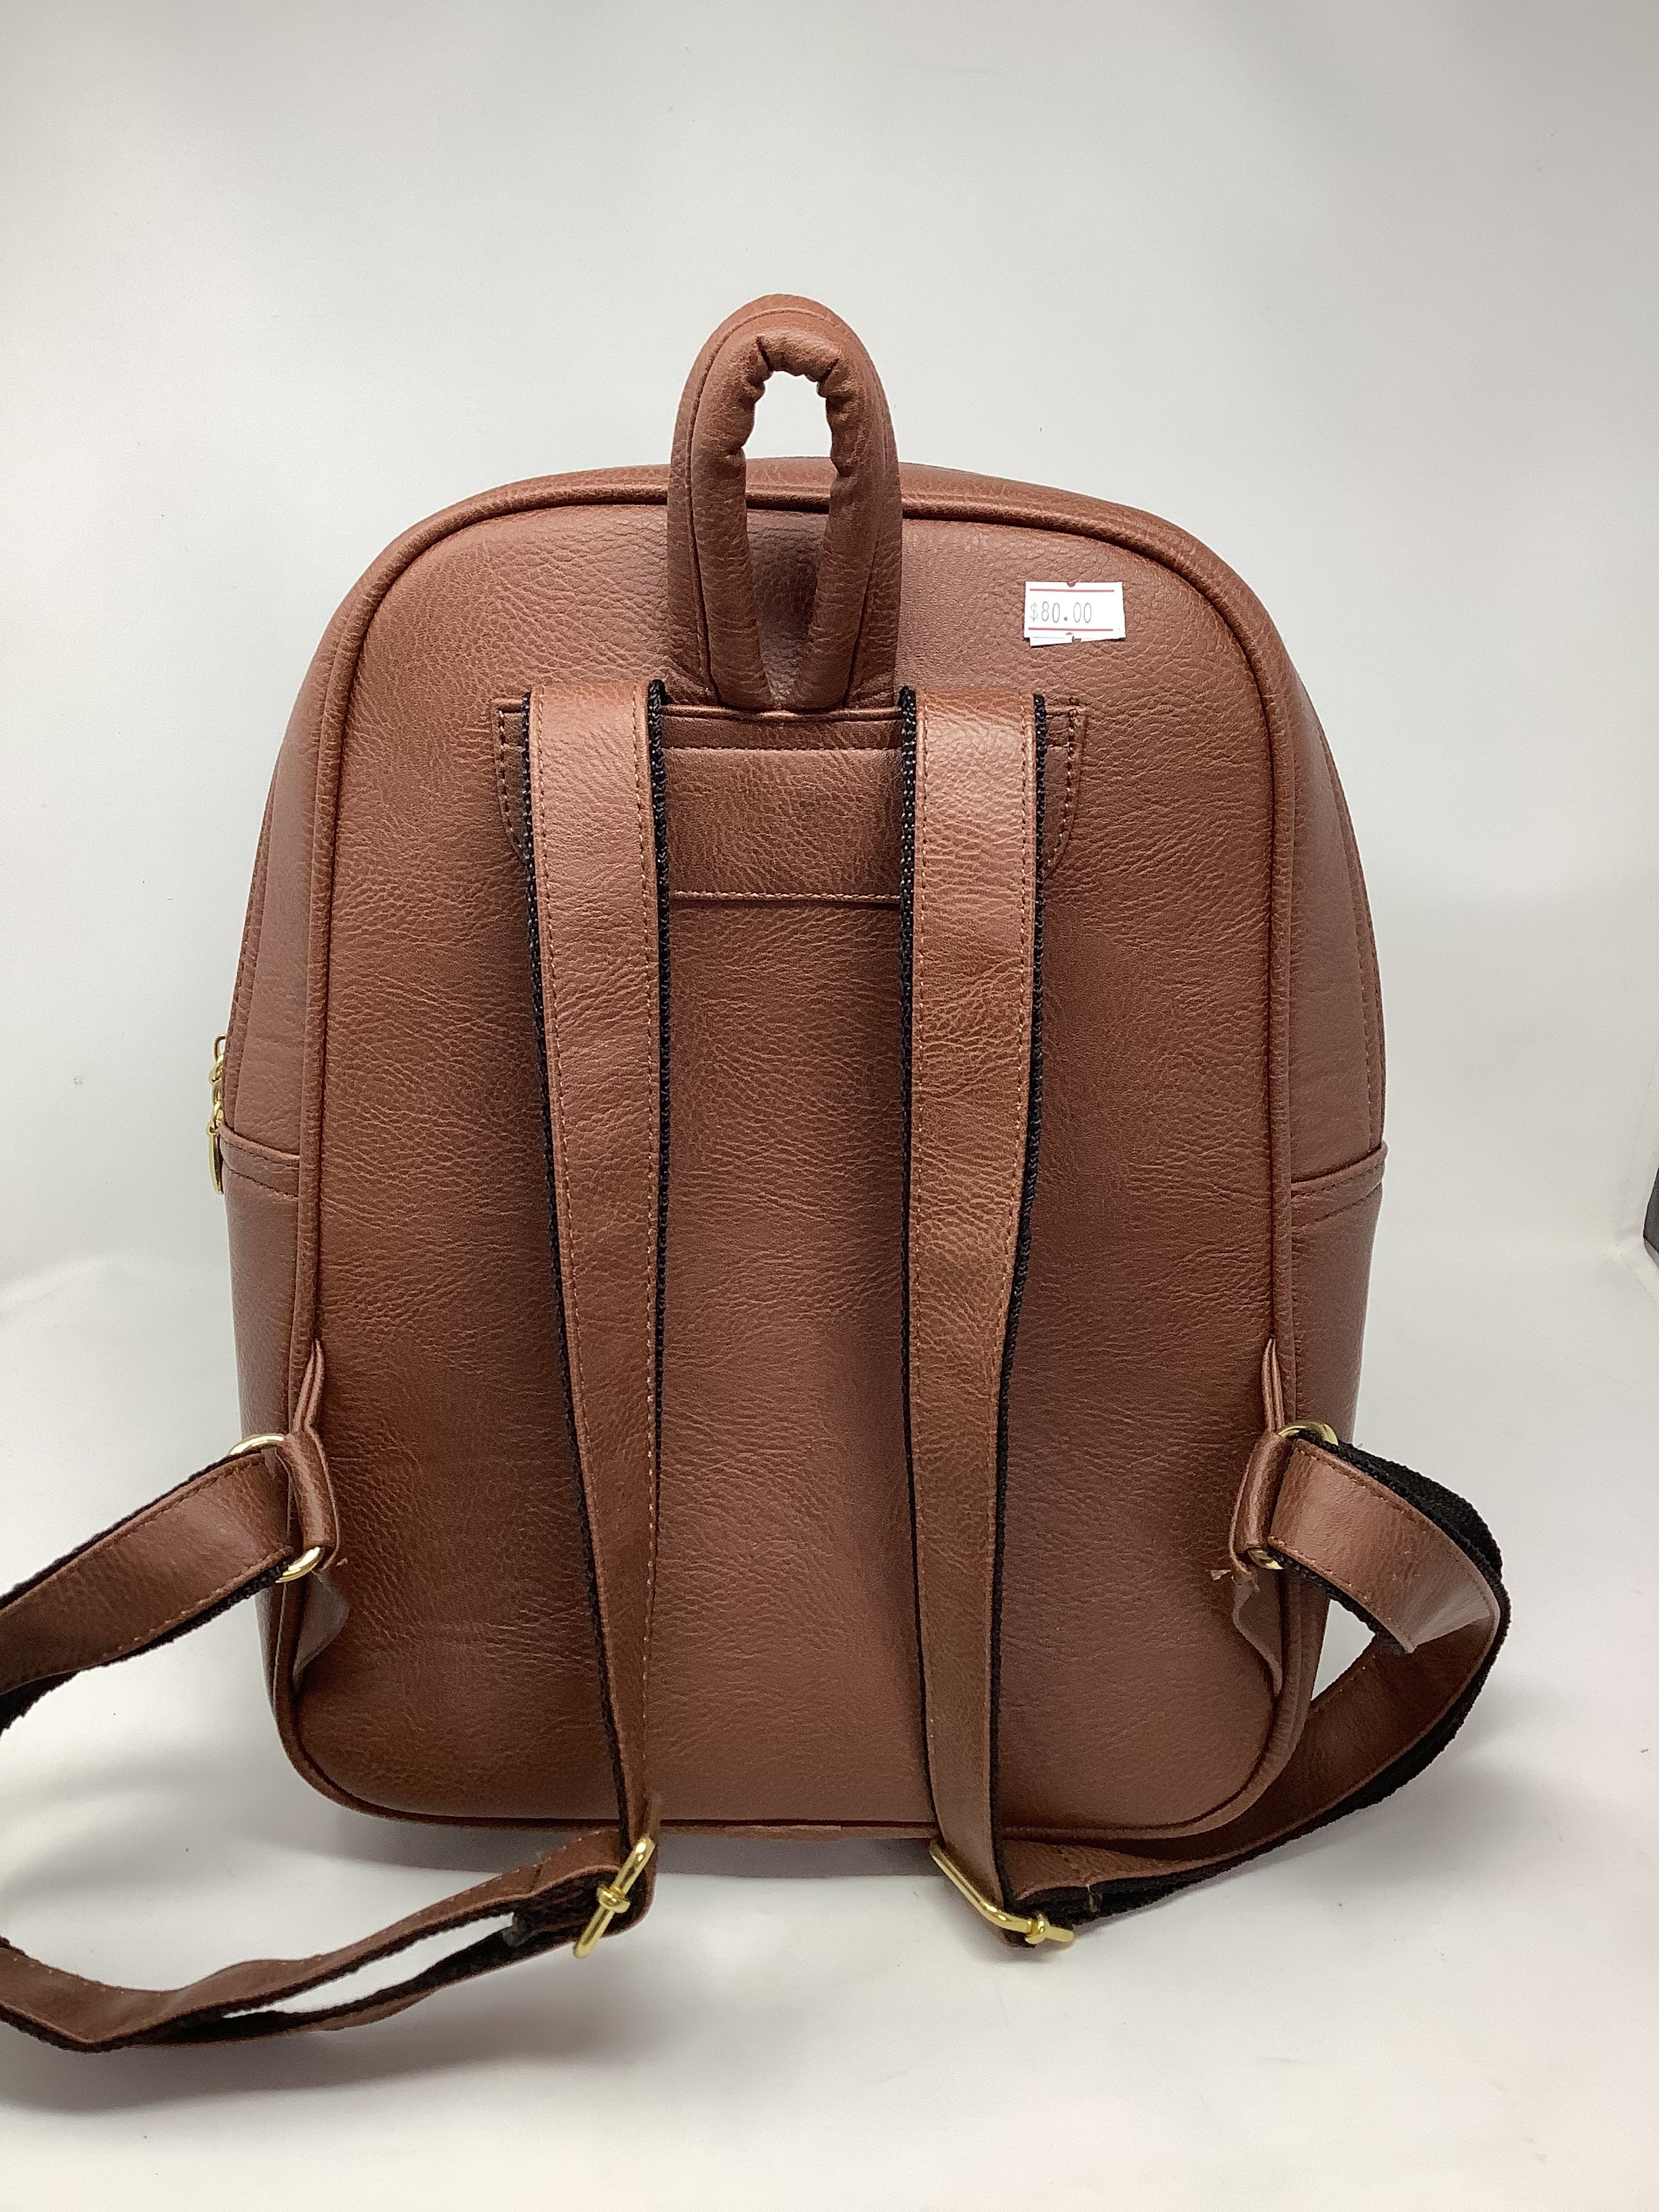 The brown Sun flower back pack